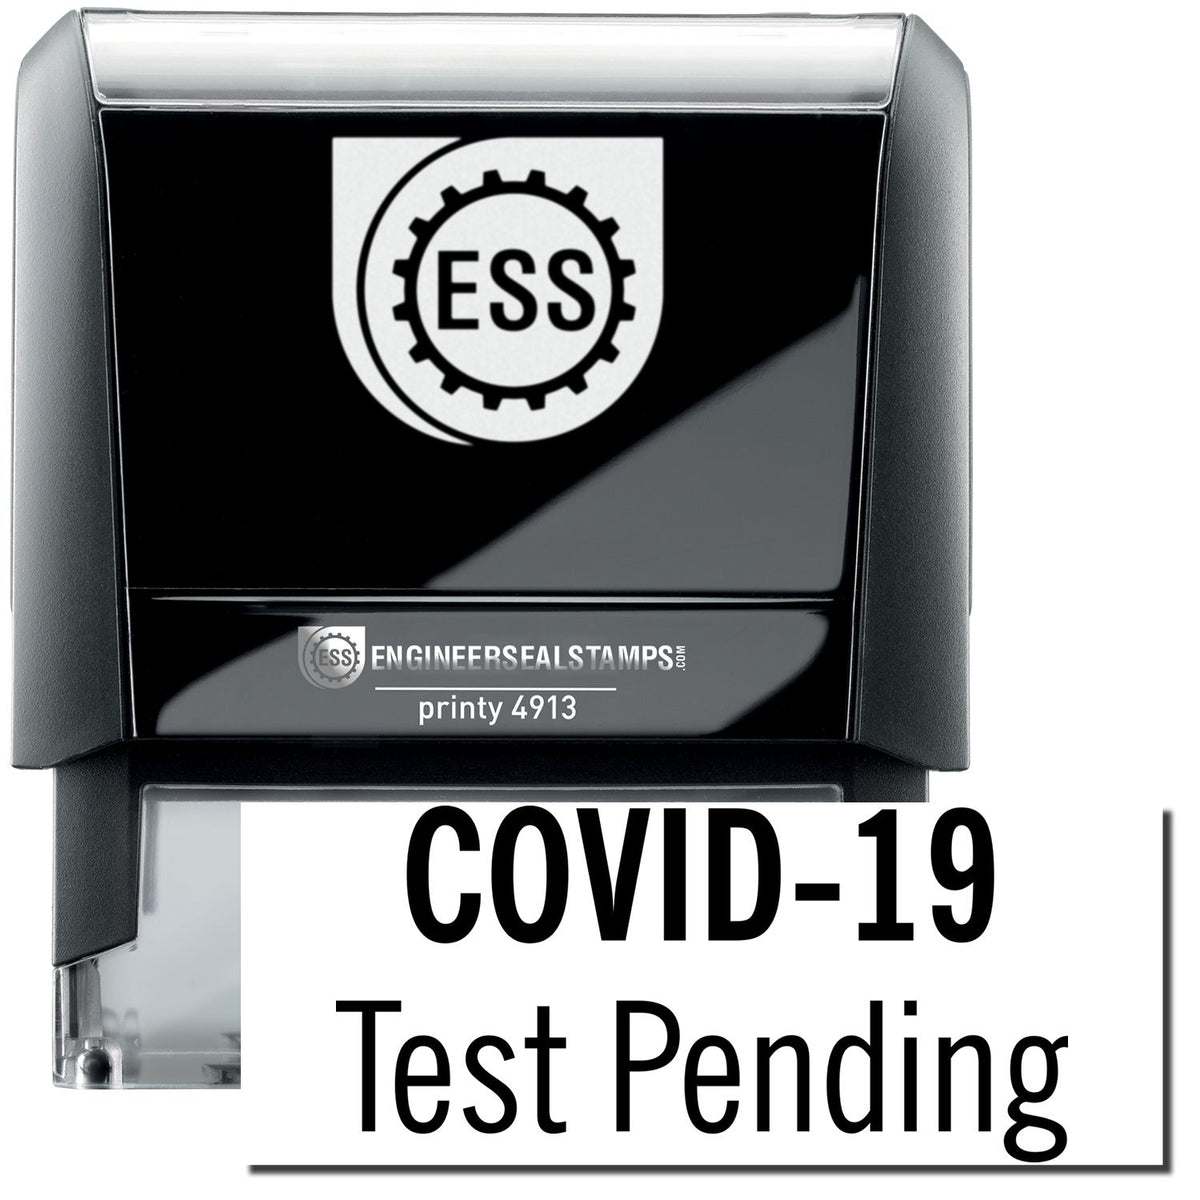 A self-inking stamp with a stamped image showing how the text &quot;COVID-19 Test Pending&quot; in a large font is displayed by it after stamping.